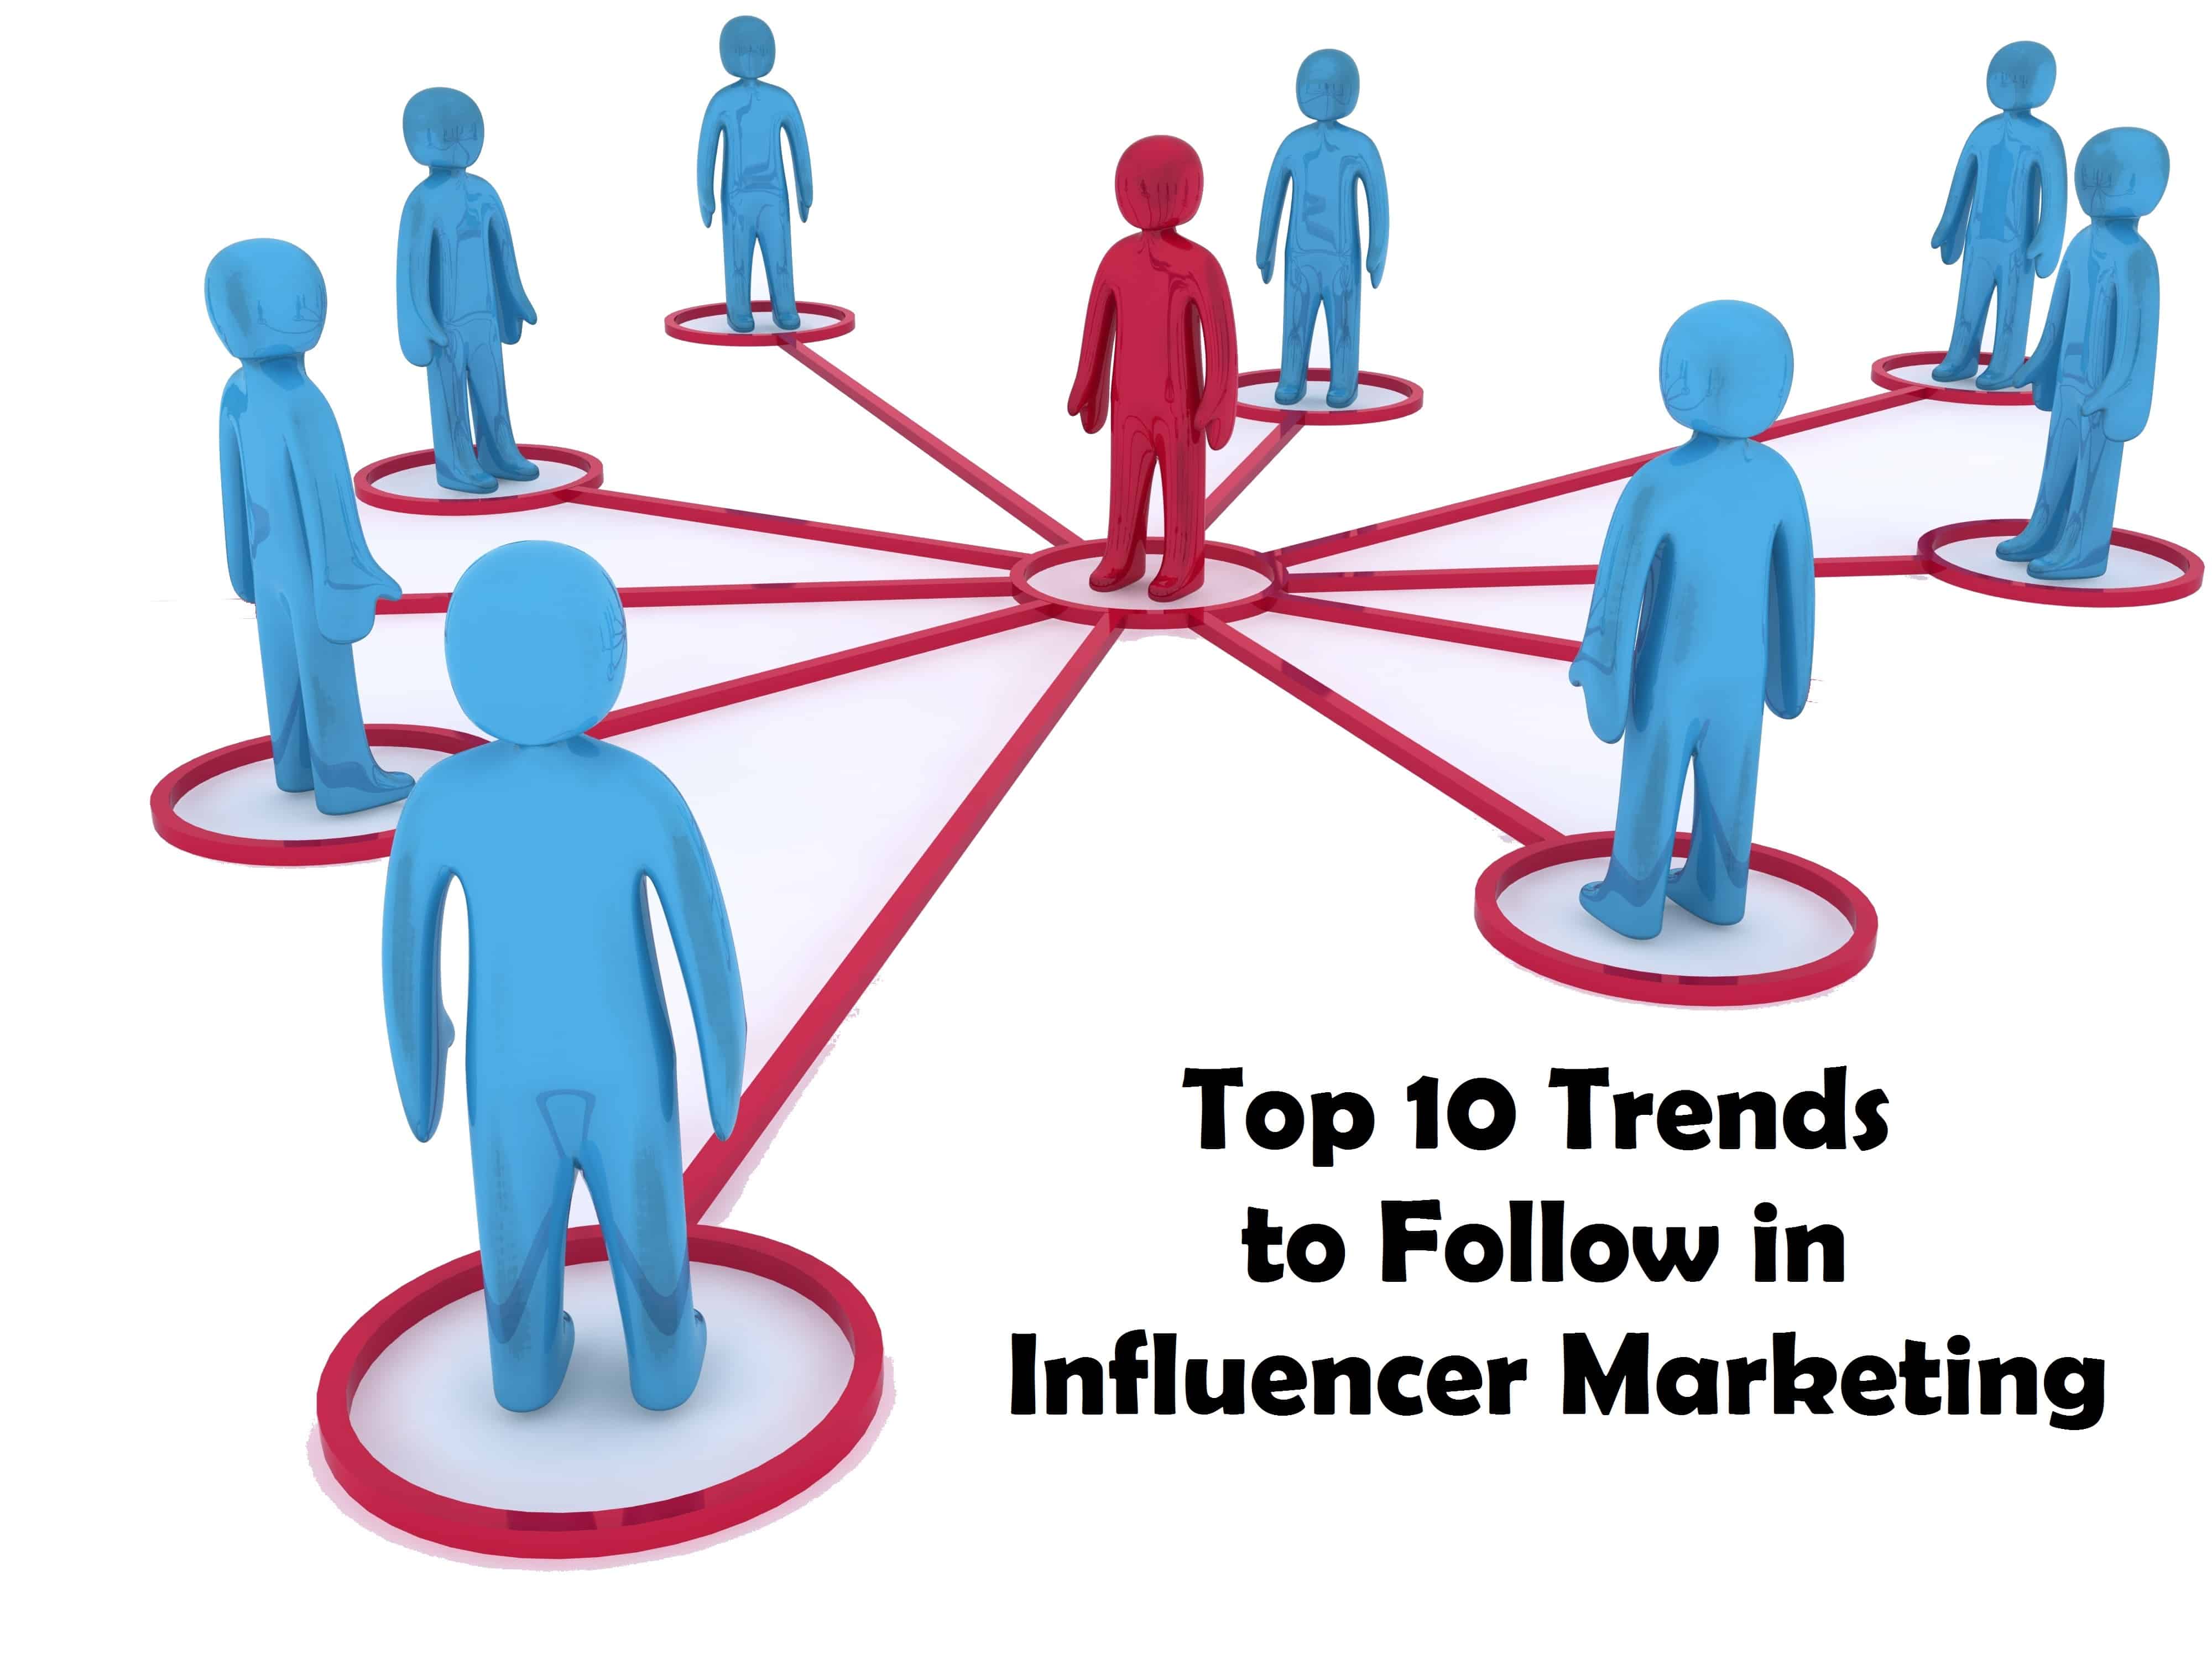 Top 10 Trends to Follow in Influencer Marketing